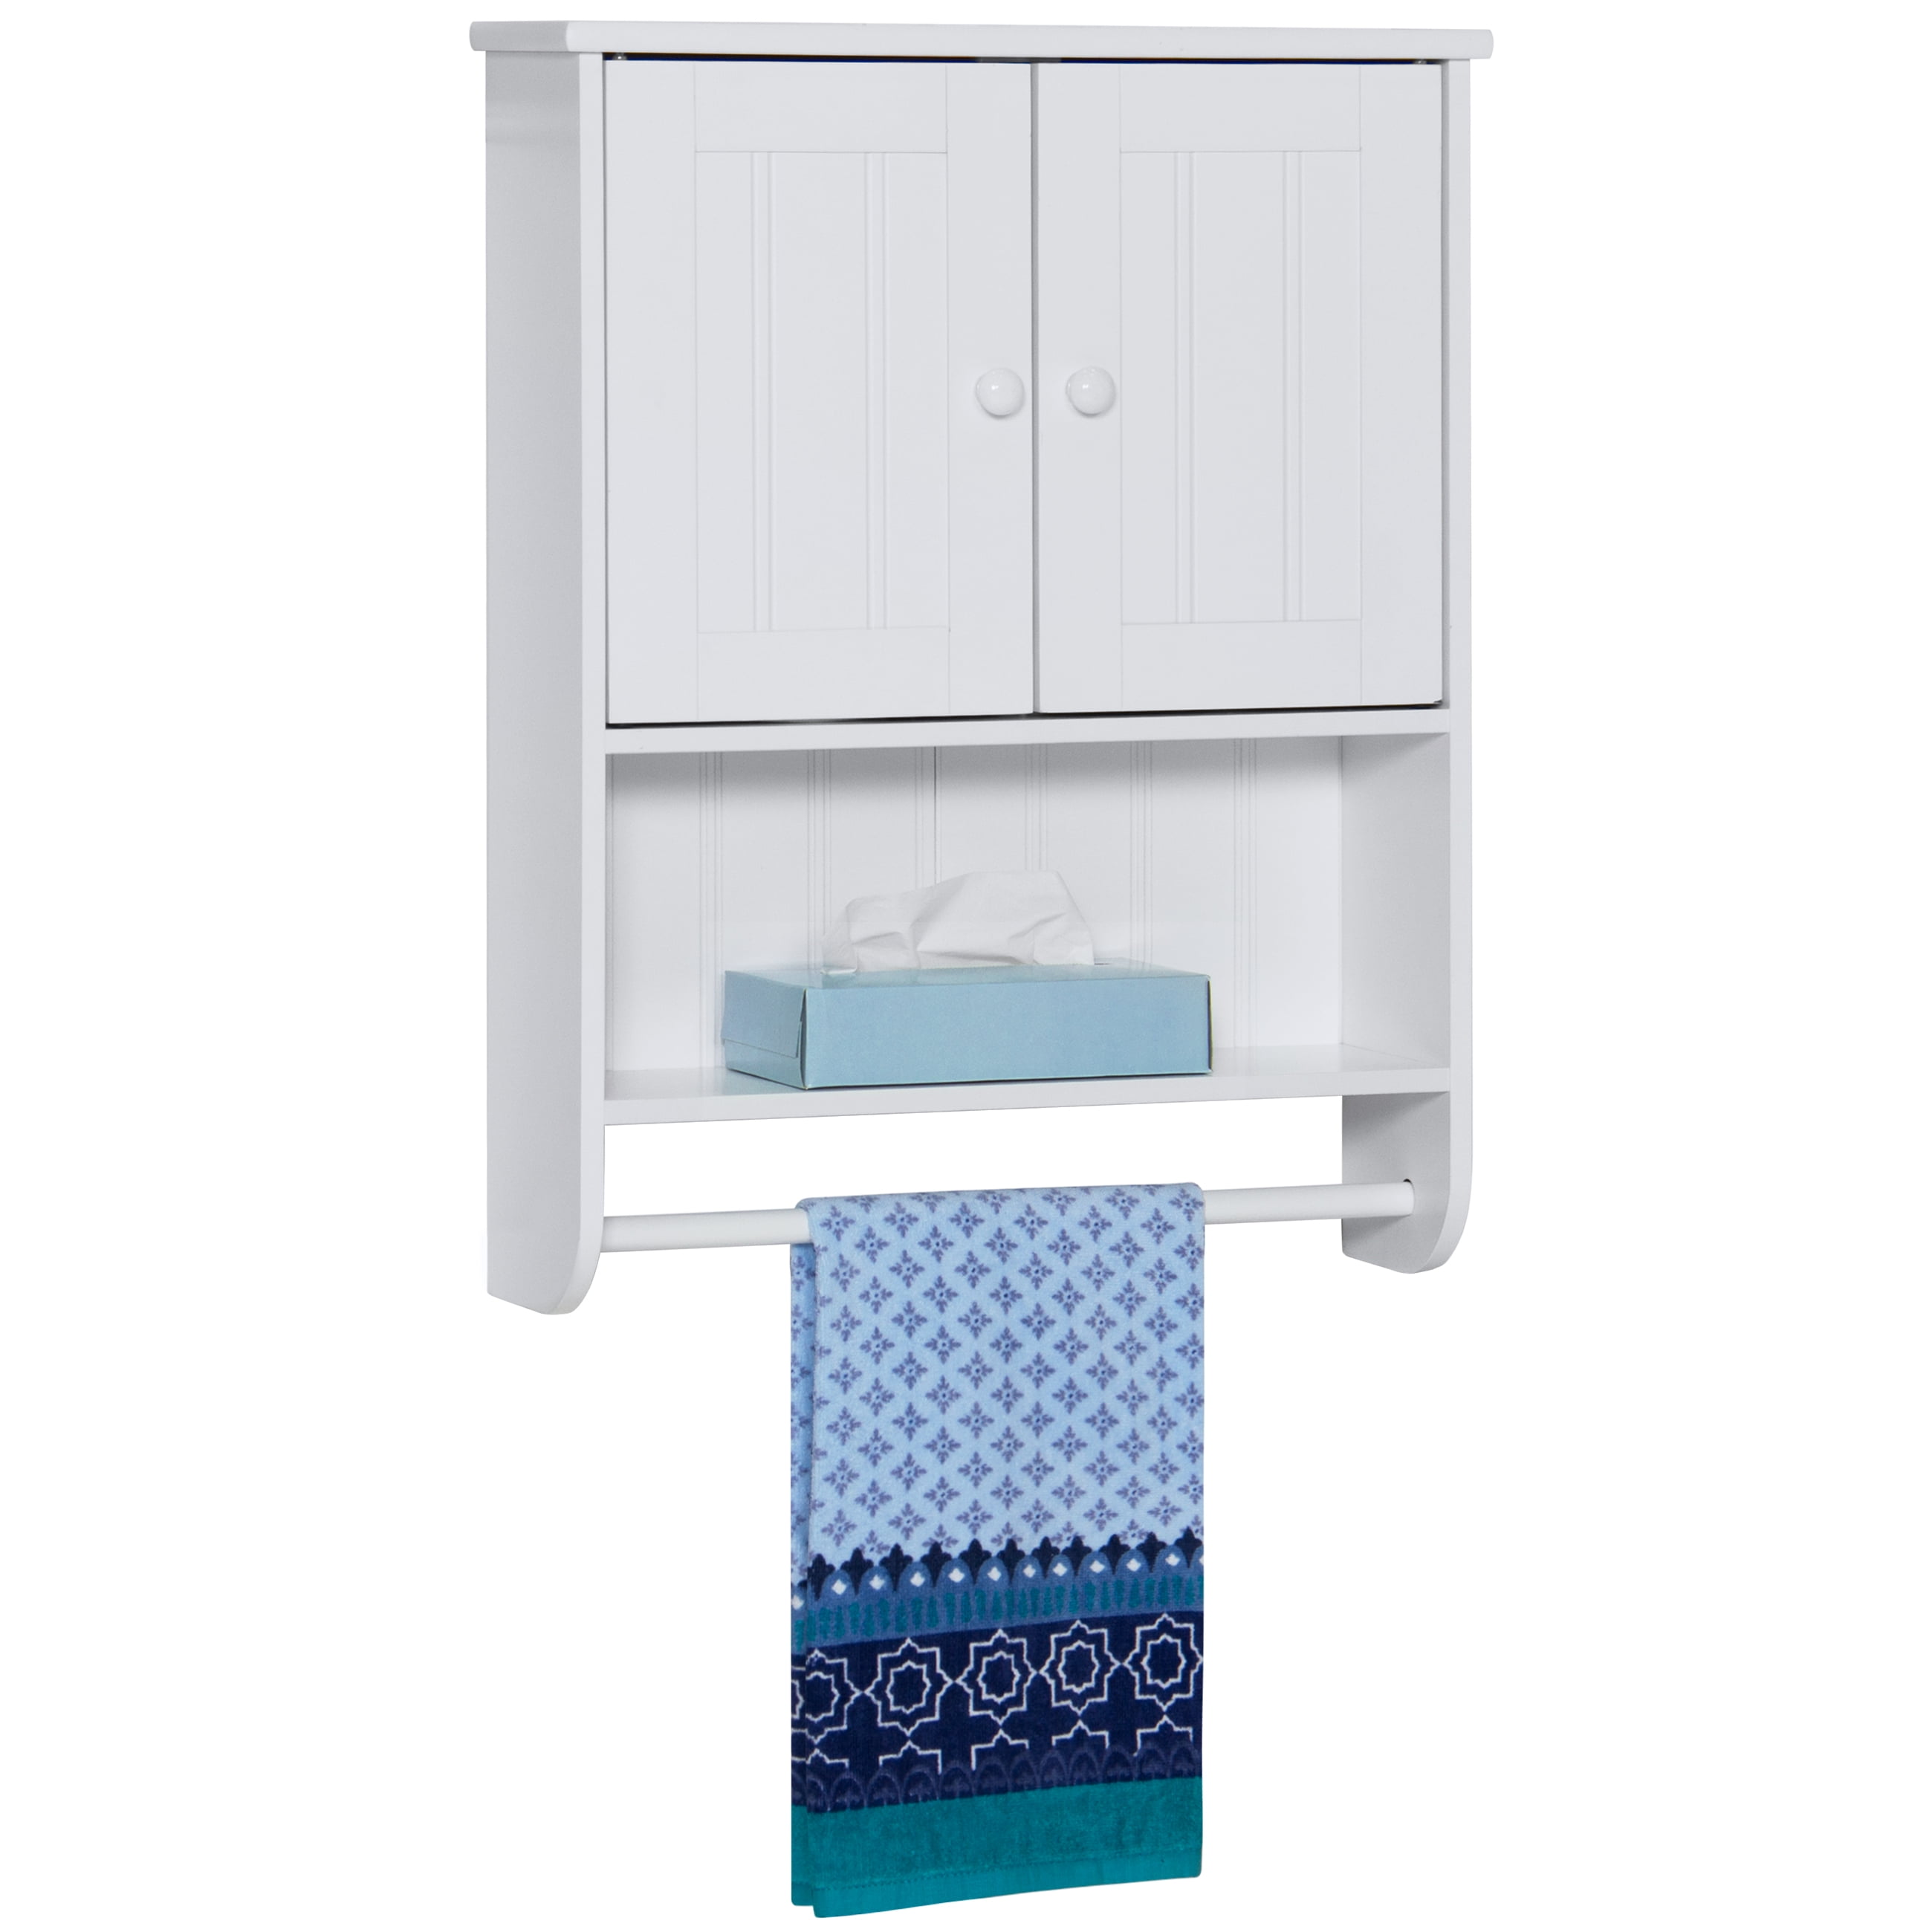 Best Choice Products Bathroom Storage Organization Wall Cabinet W Double Doors Towel Bar Wainscot White Com - White Wall Mounted Bathroom Cabinet With Towel Bar